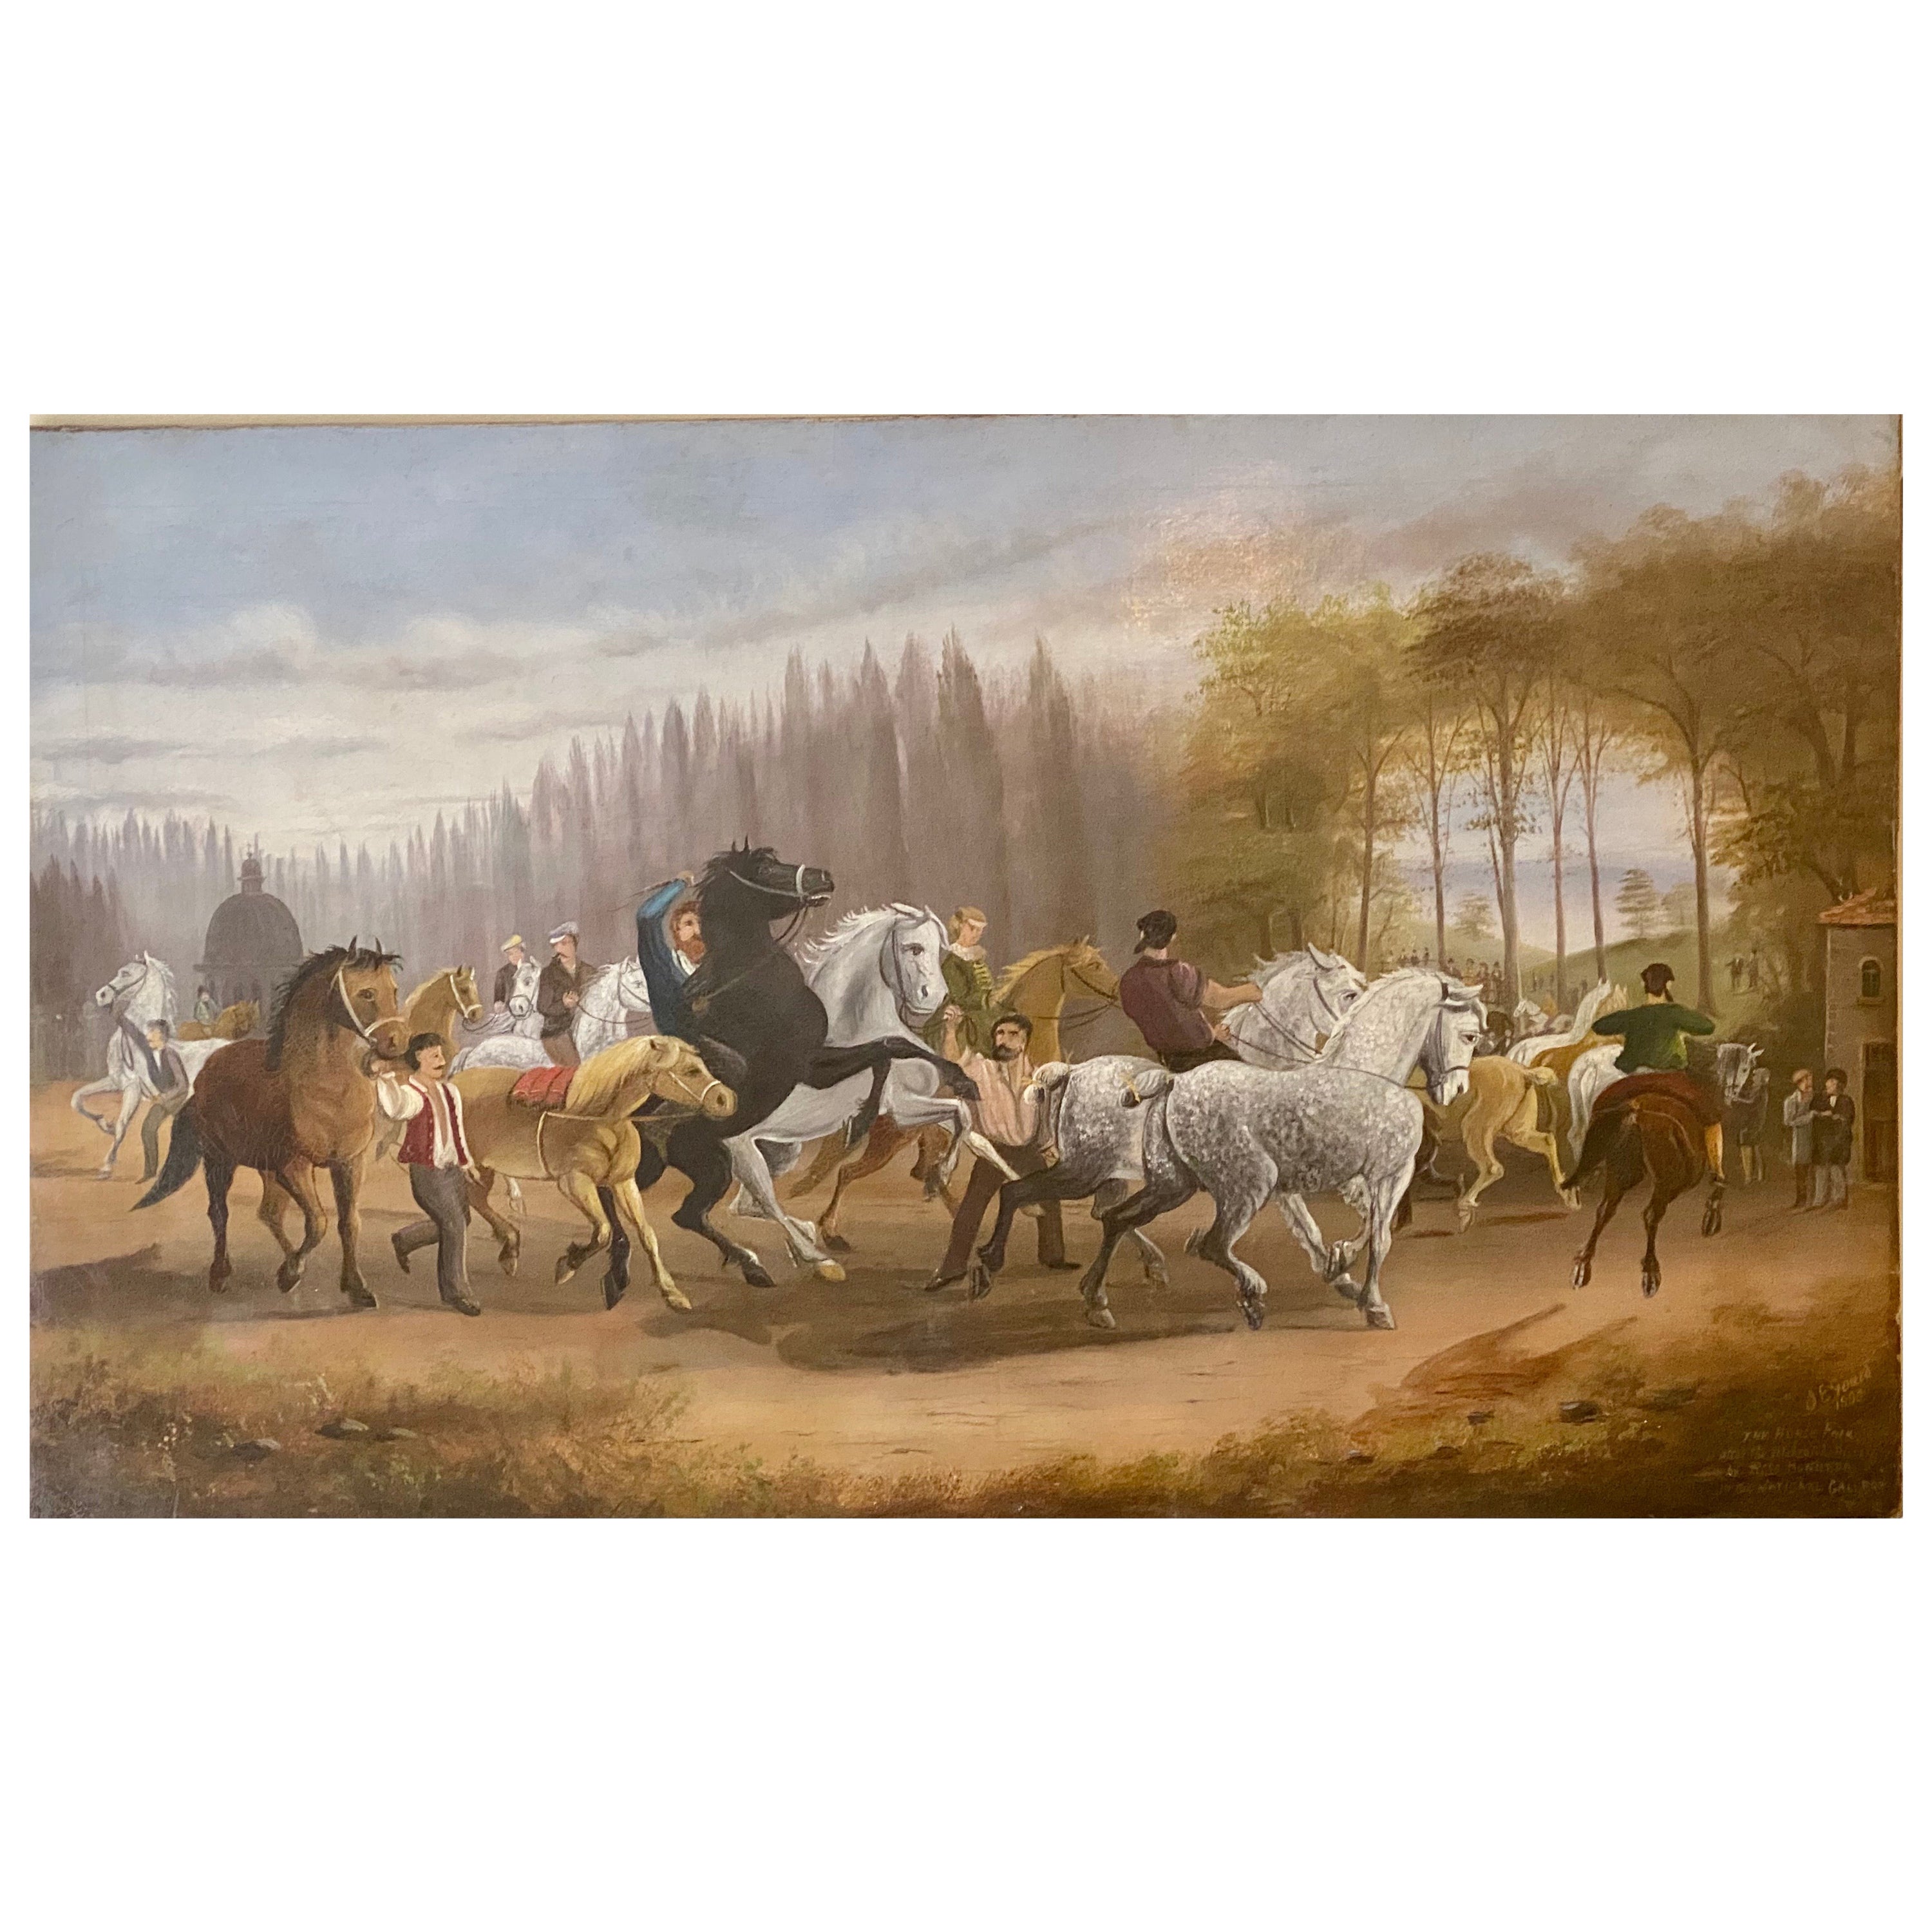 Large 19th Century Oil Painting After Rosa Bonheur Entitled "The Horse Fair"